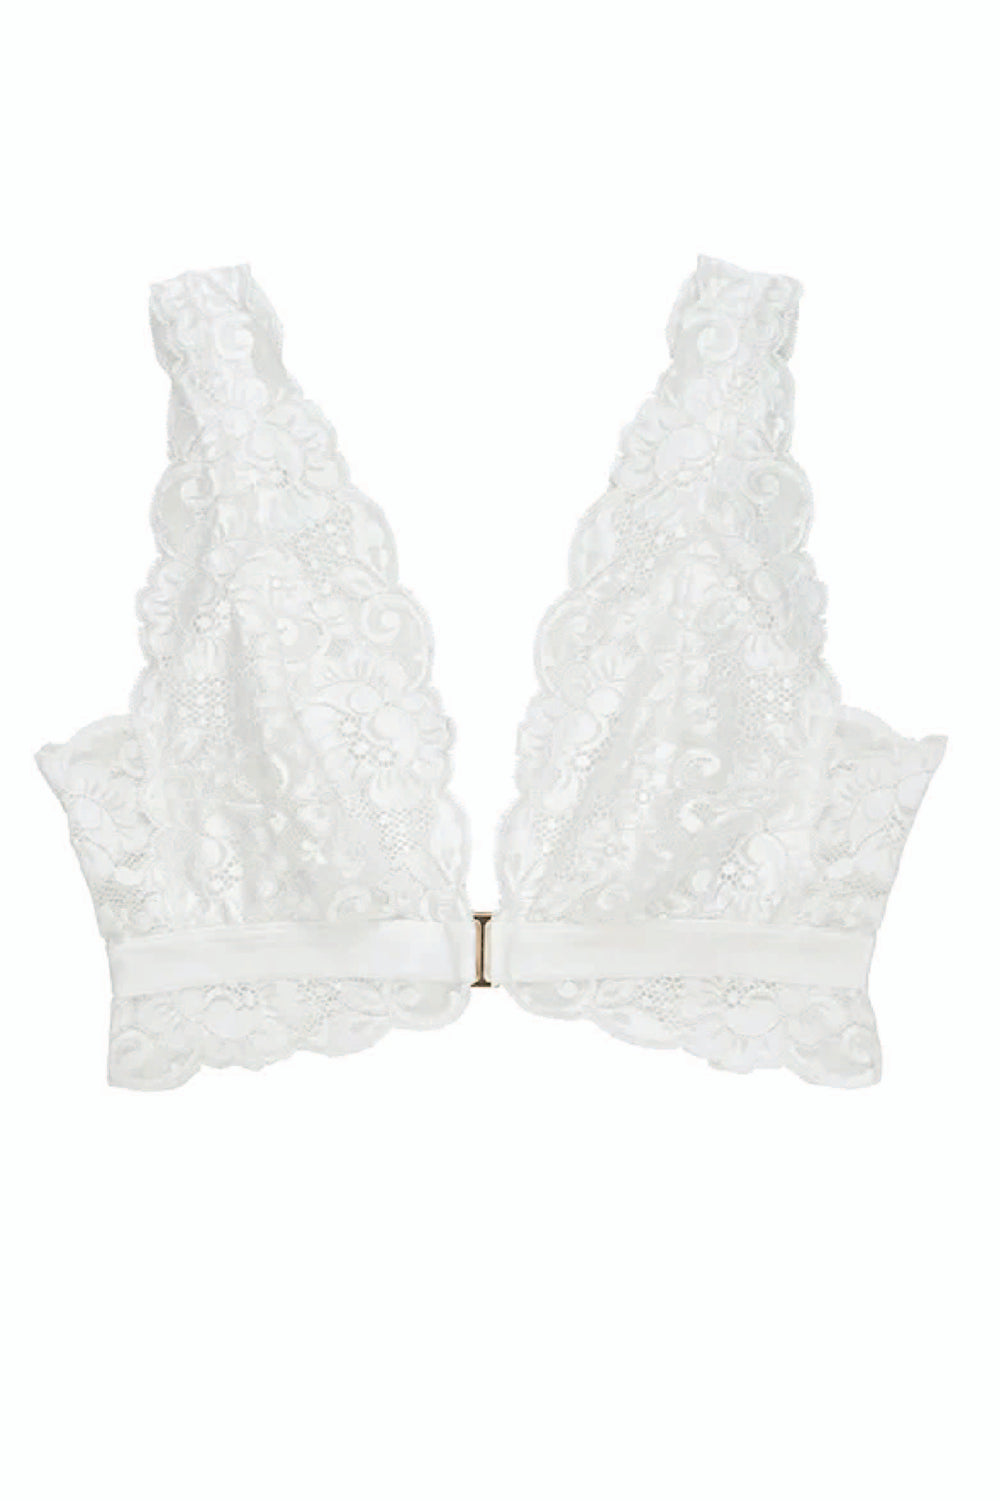 White bralette , Like new!, Never used just remove